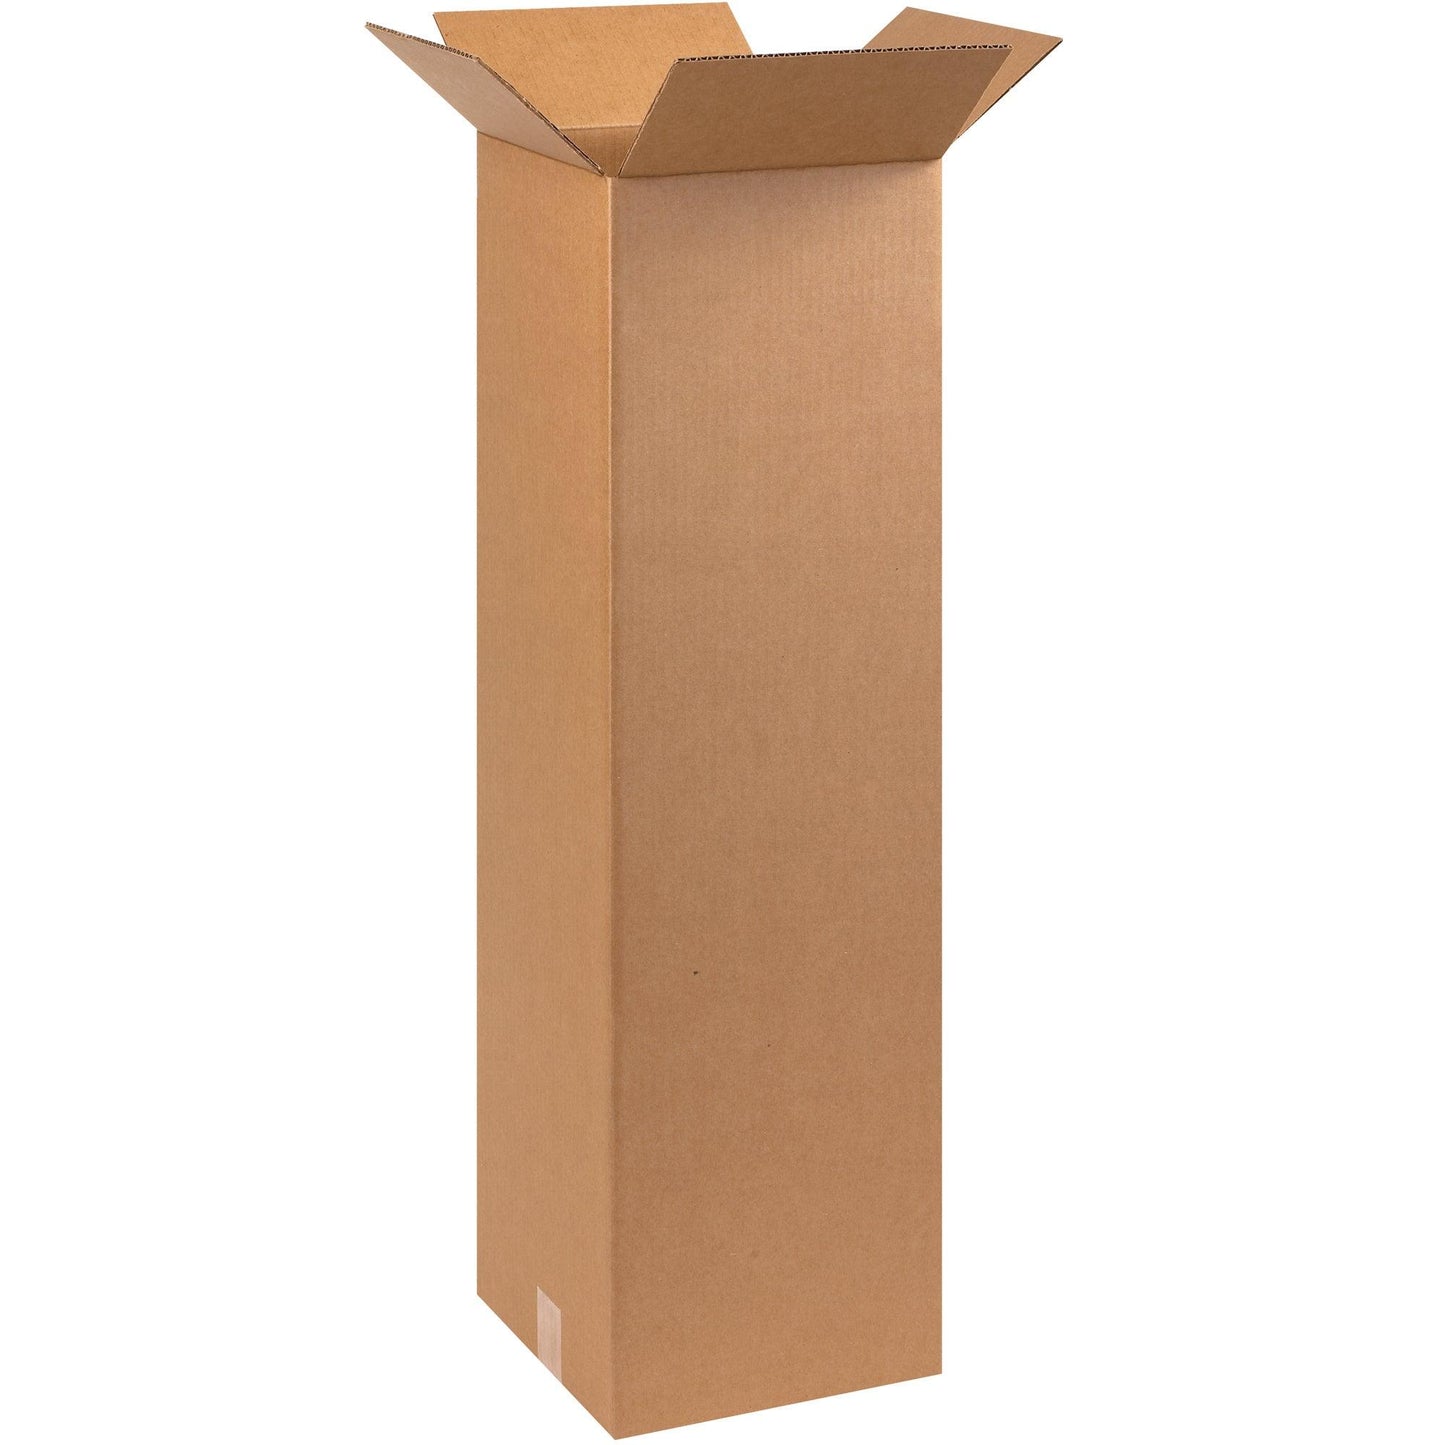 10 x 10 x 36" Tall Corrugated Boxes - 101036